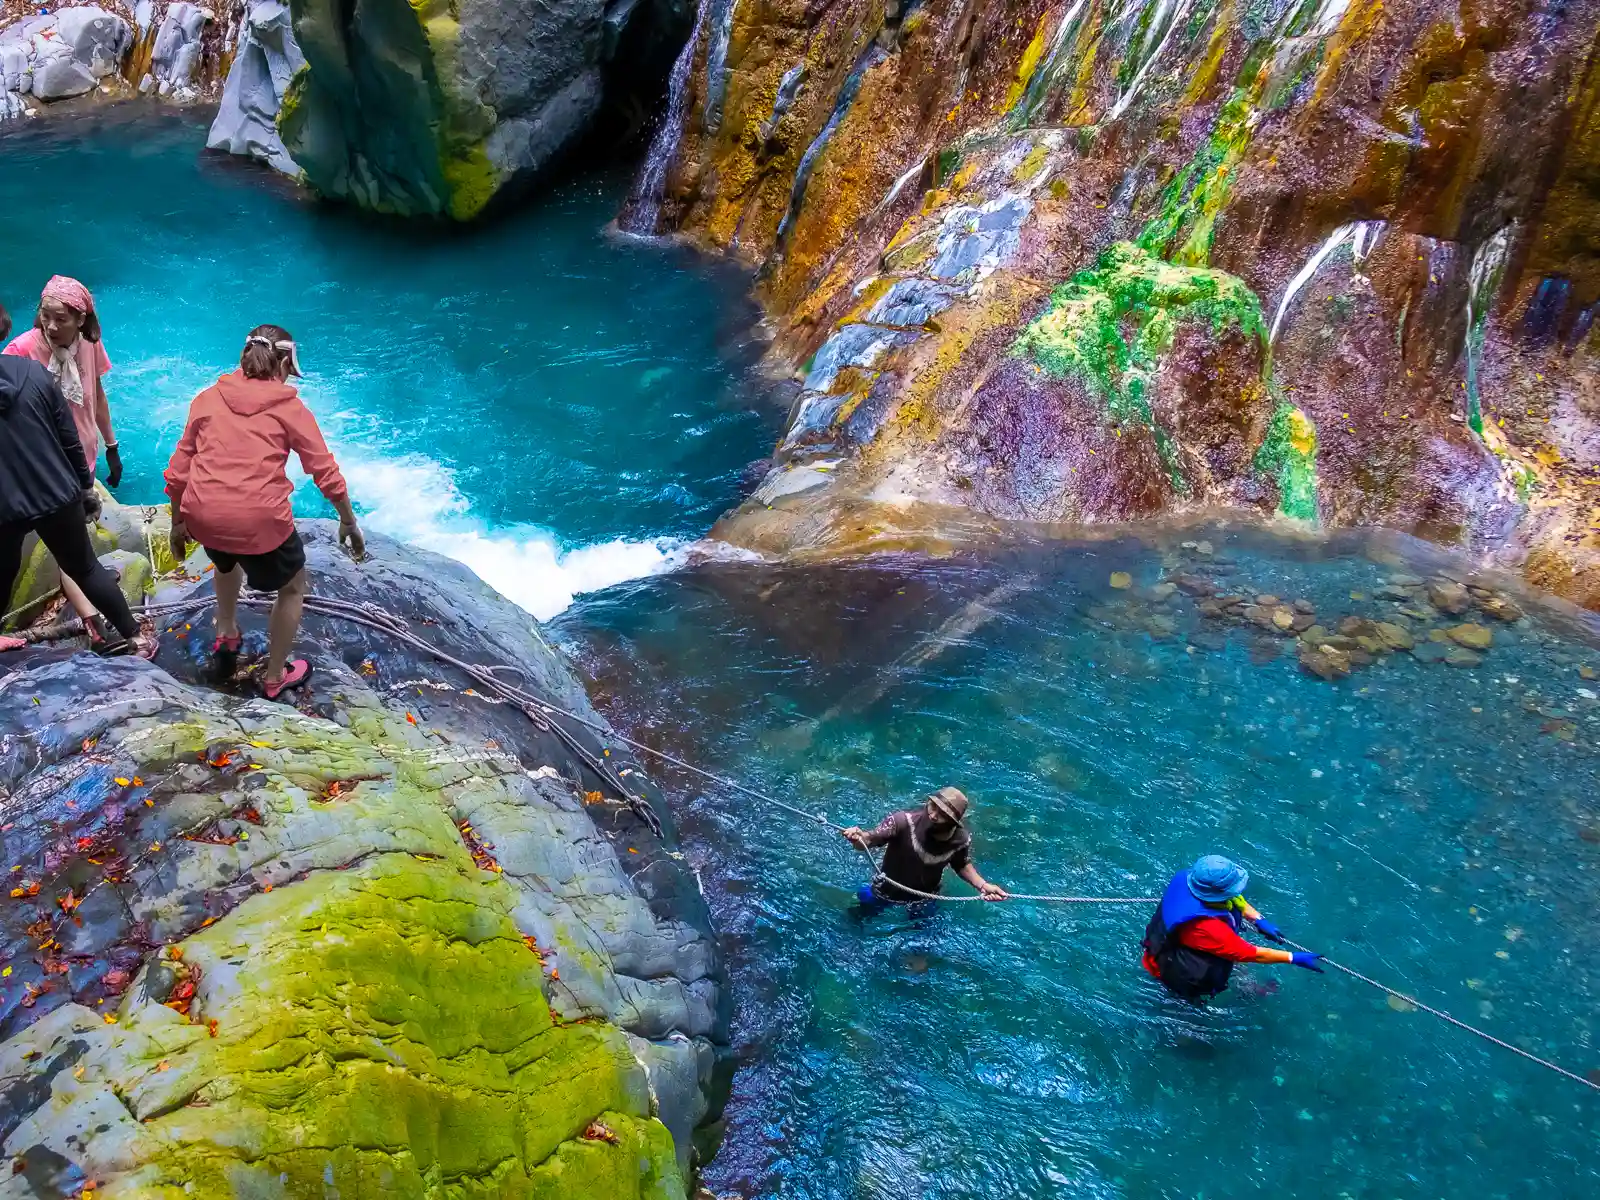 Ropes secure a river crossing in a colorful canyon filled with crystal clear water.